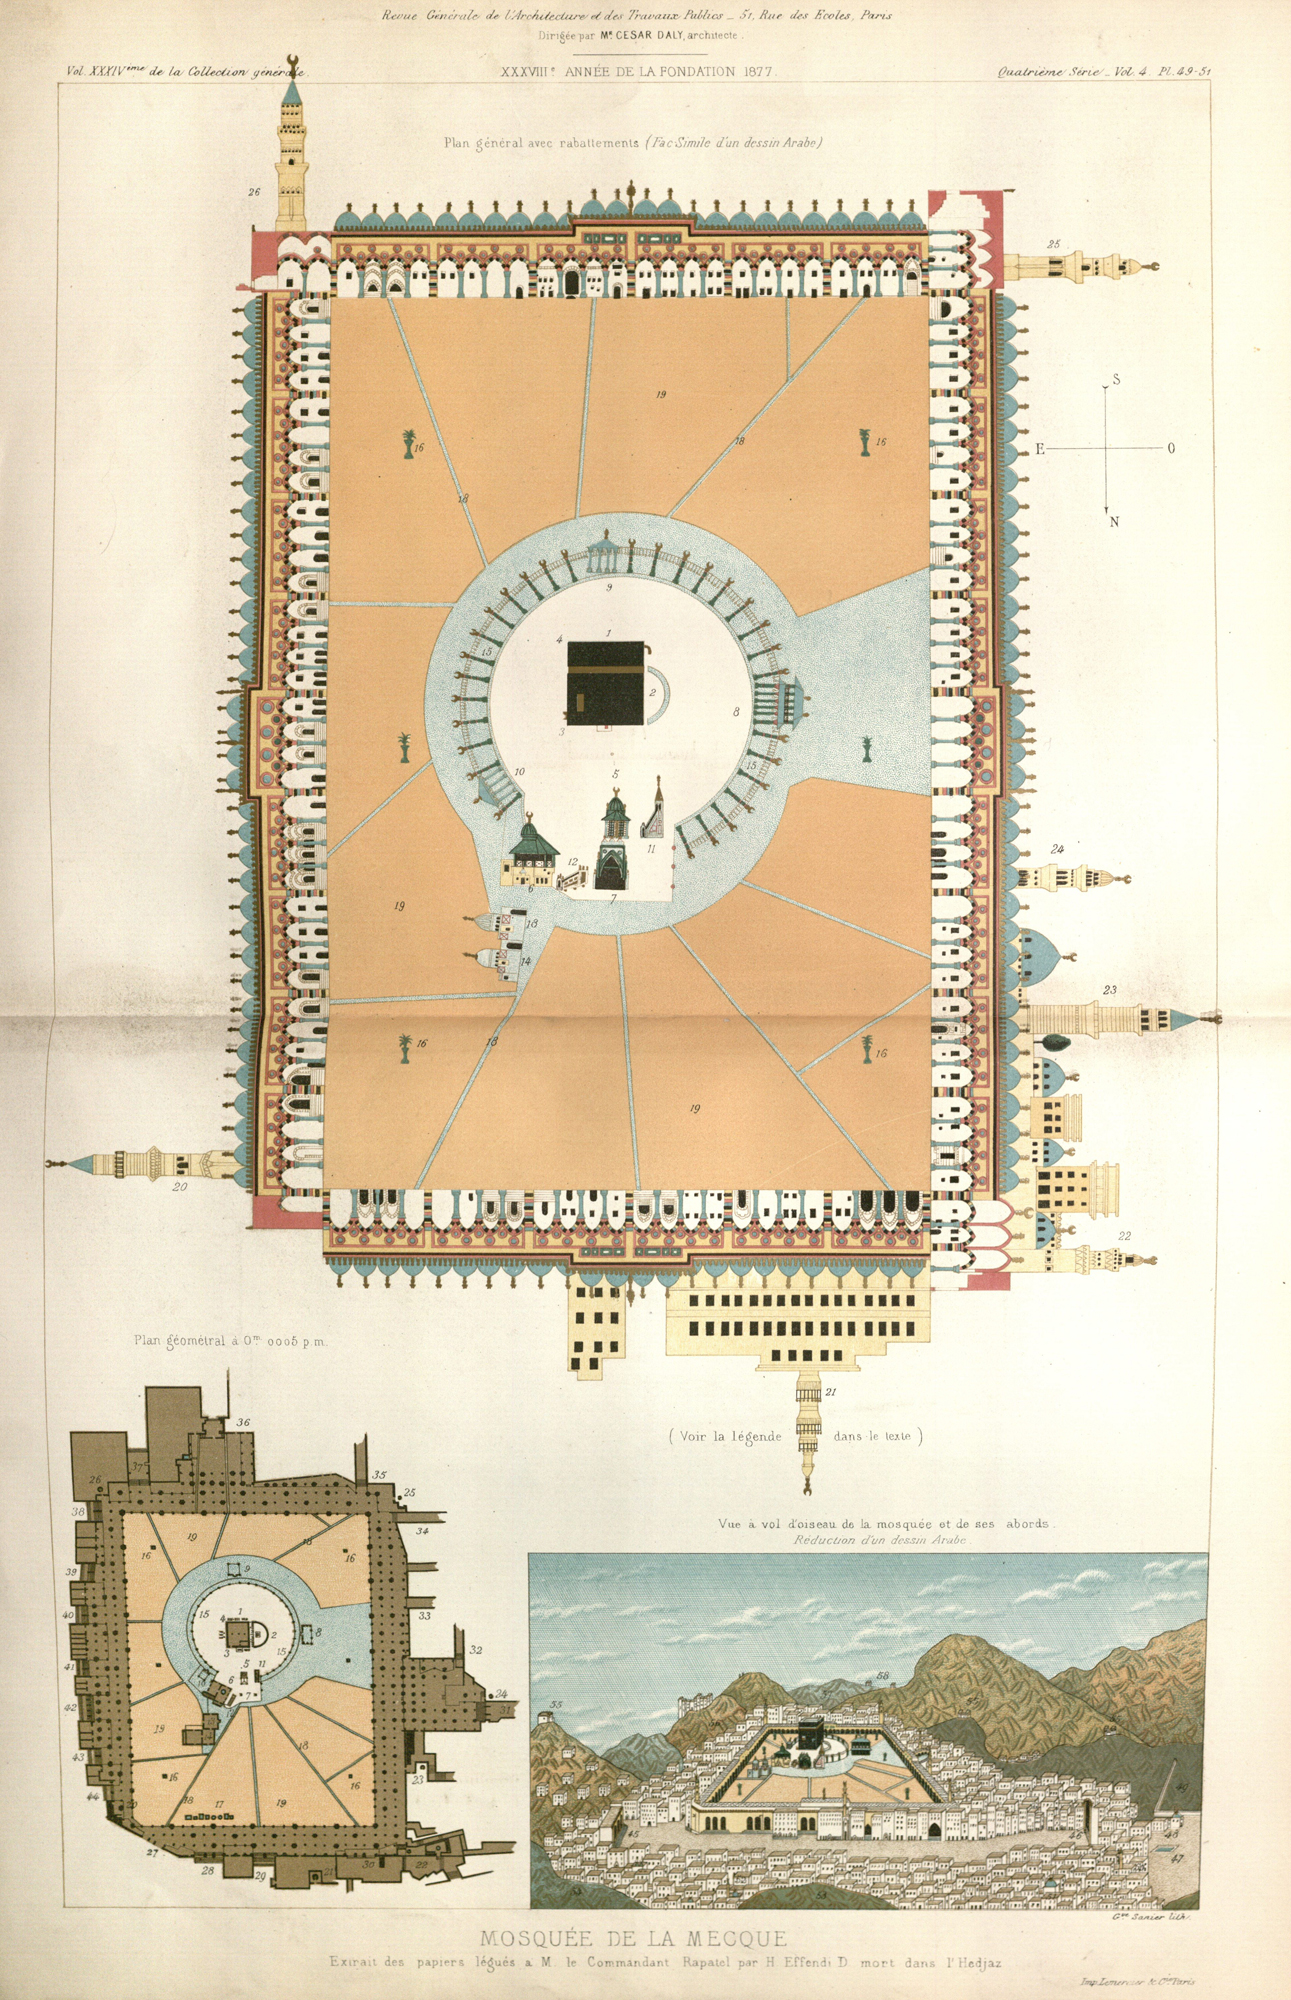 Plans and bird's-eye view of the mosque